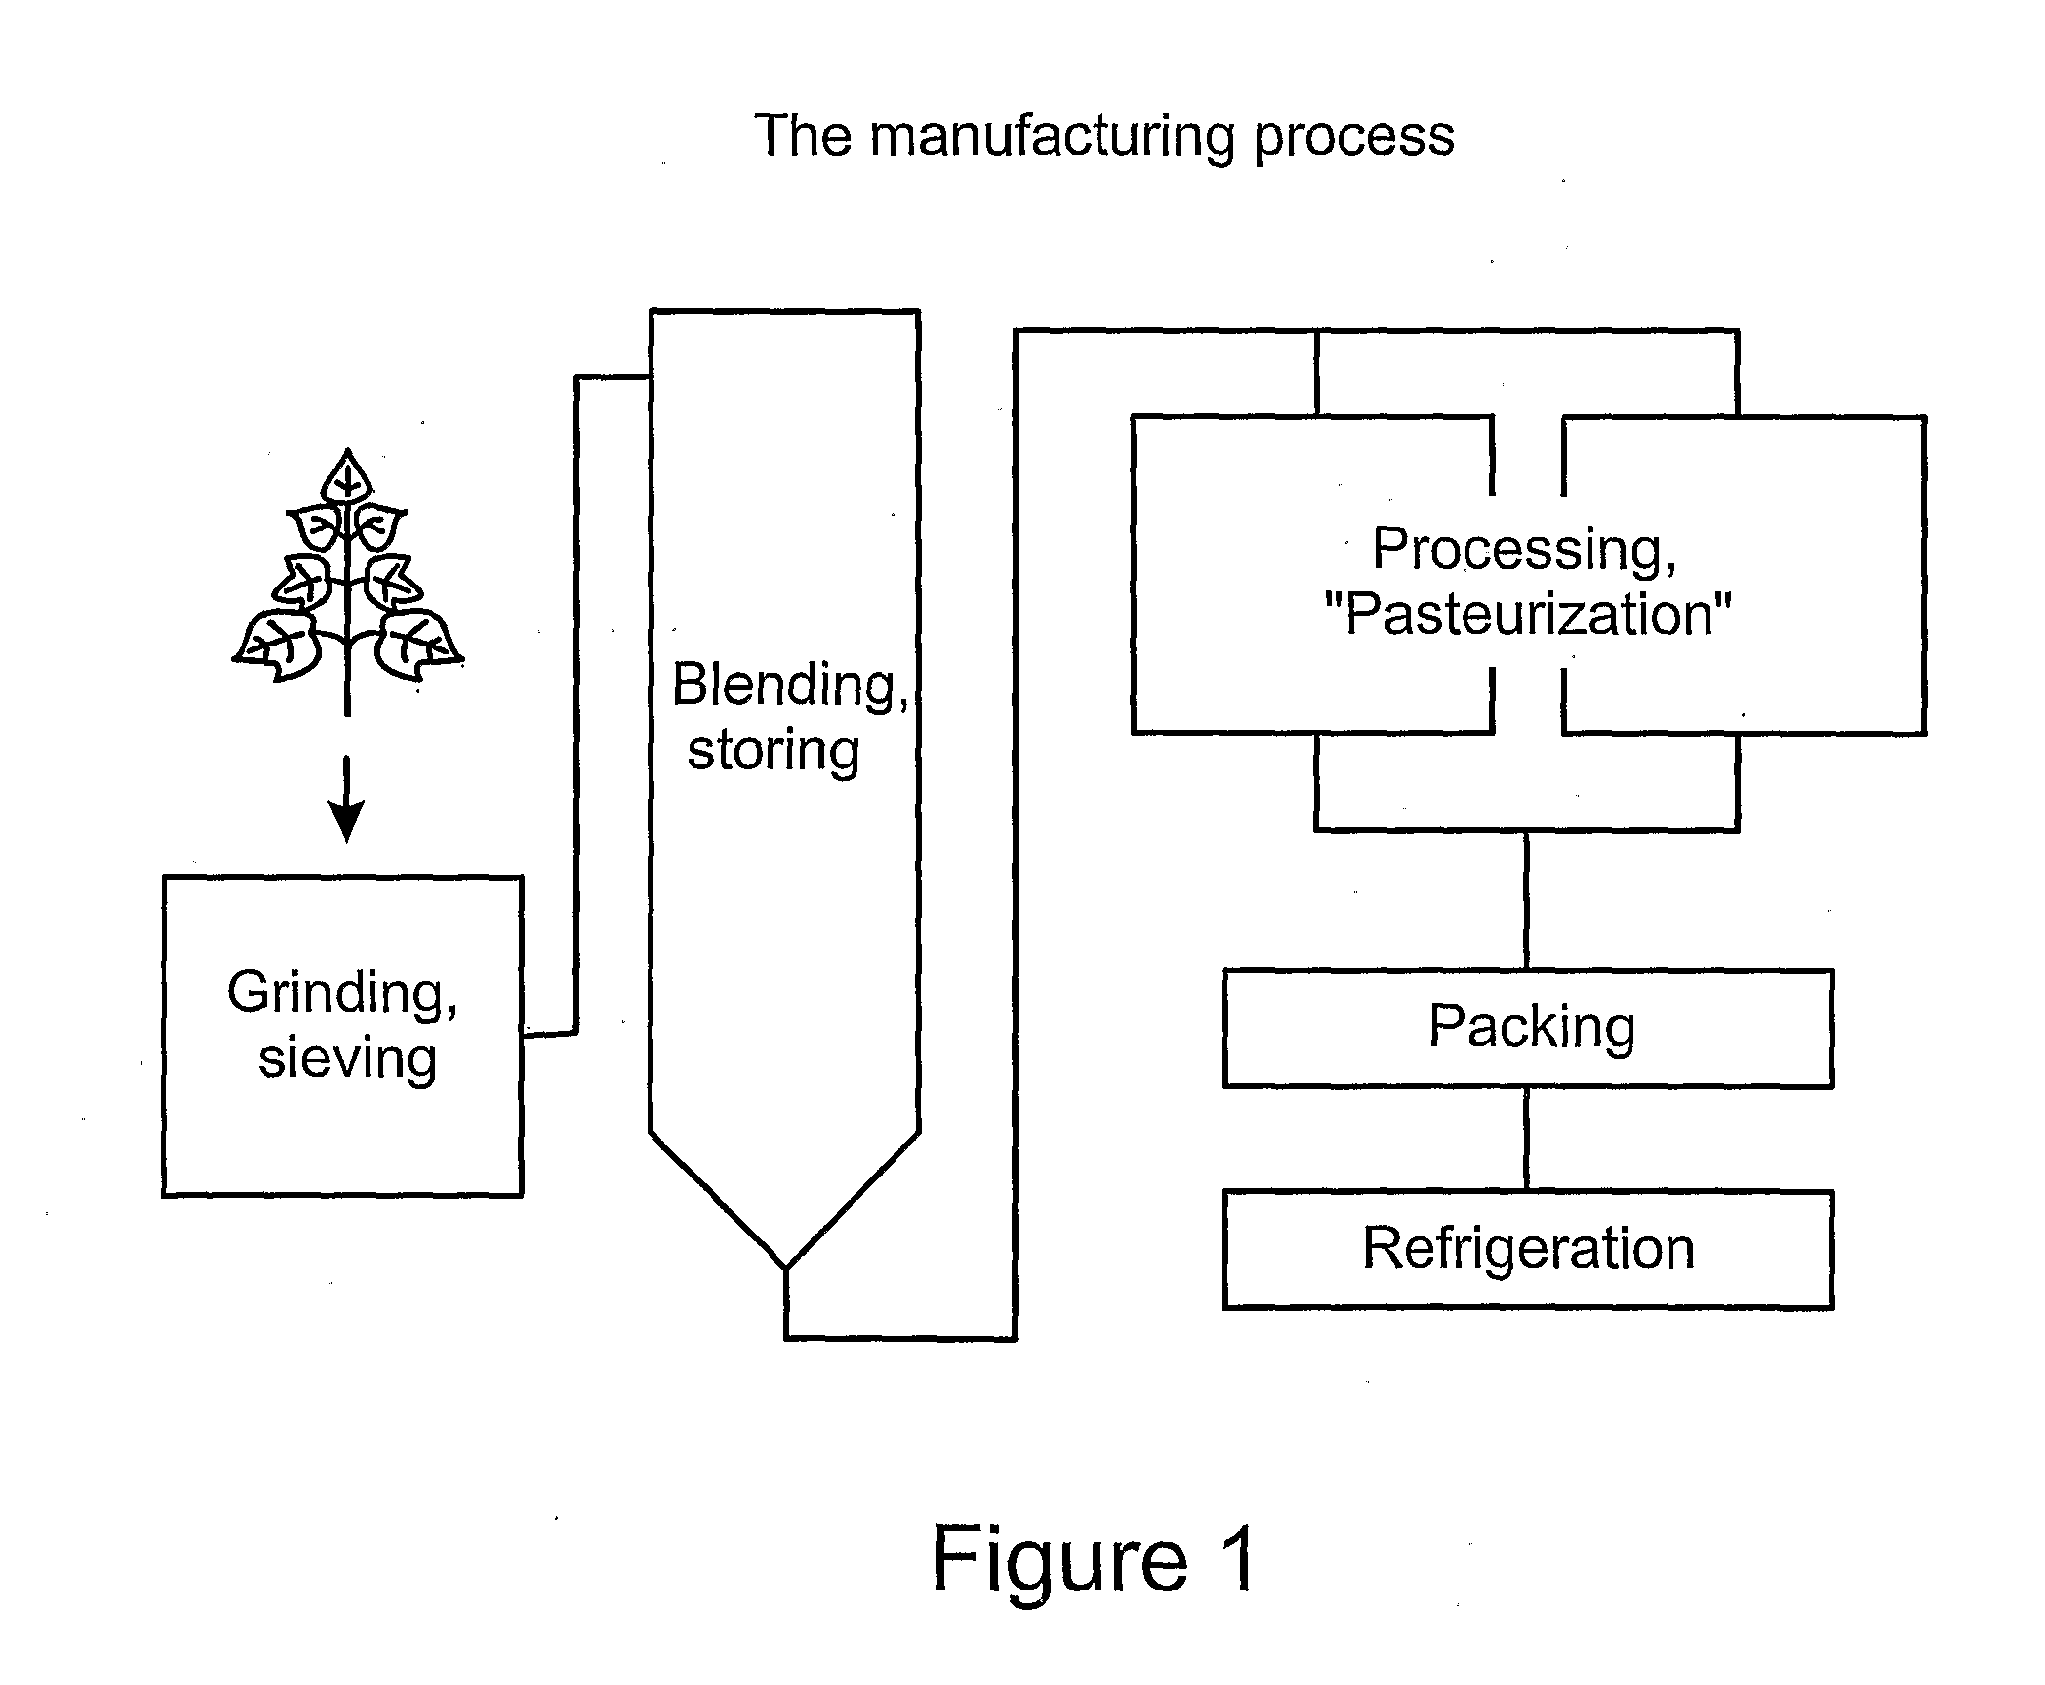 Non-tobacco moist snuff composition and a method for its manufacture